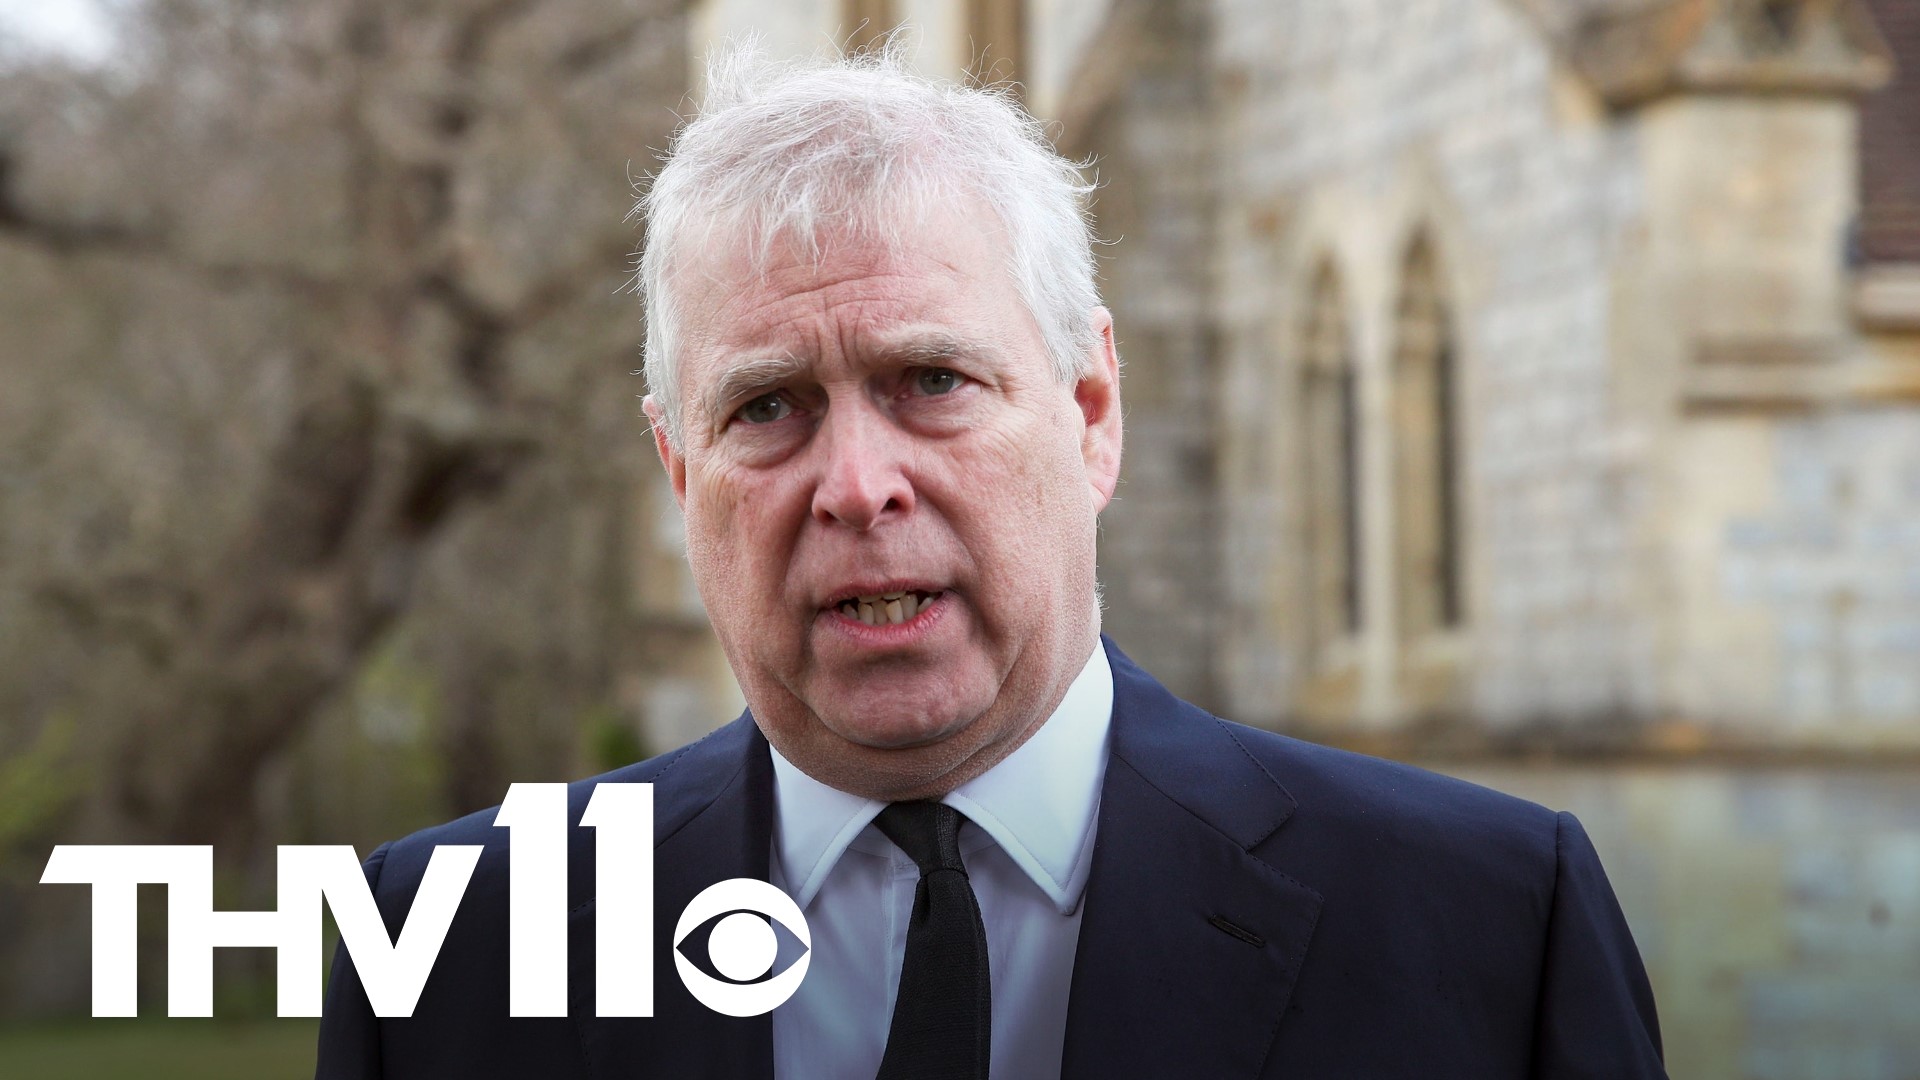 Britain's Prince Andrew could find himself in a U.S. court. A judge has turned down the British royal's request to throw out a lawsuit filed against him.